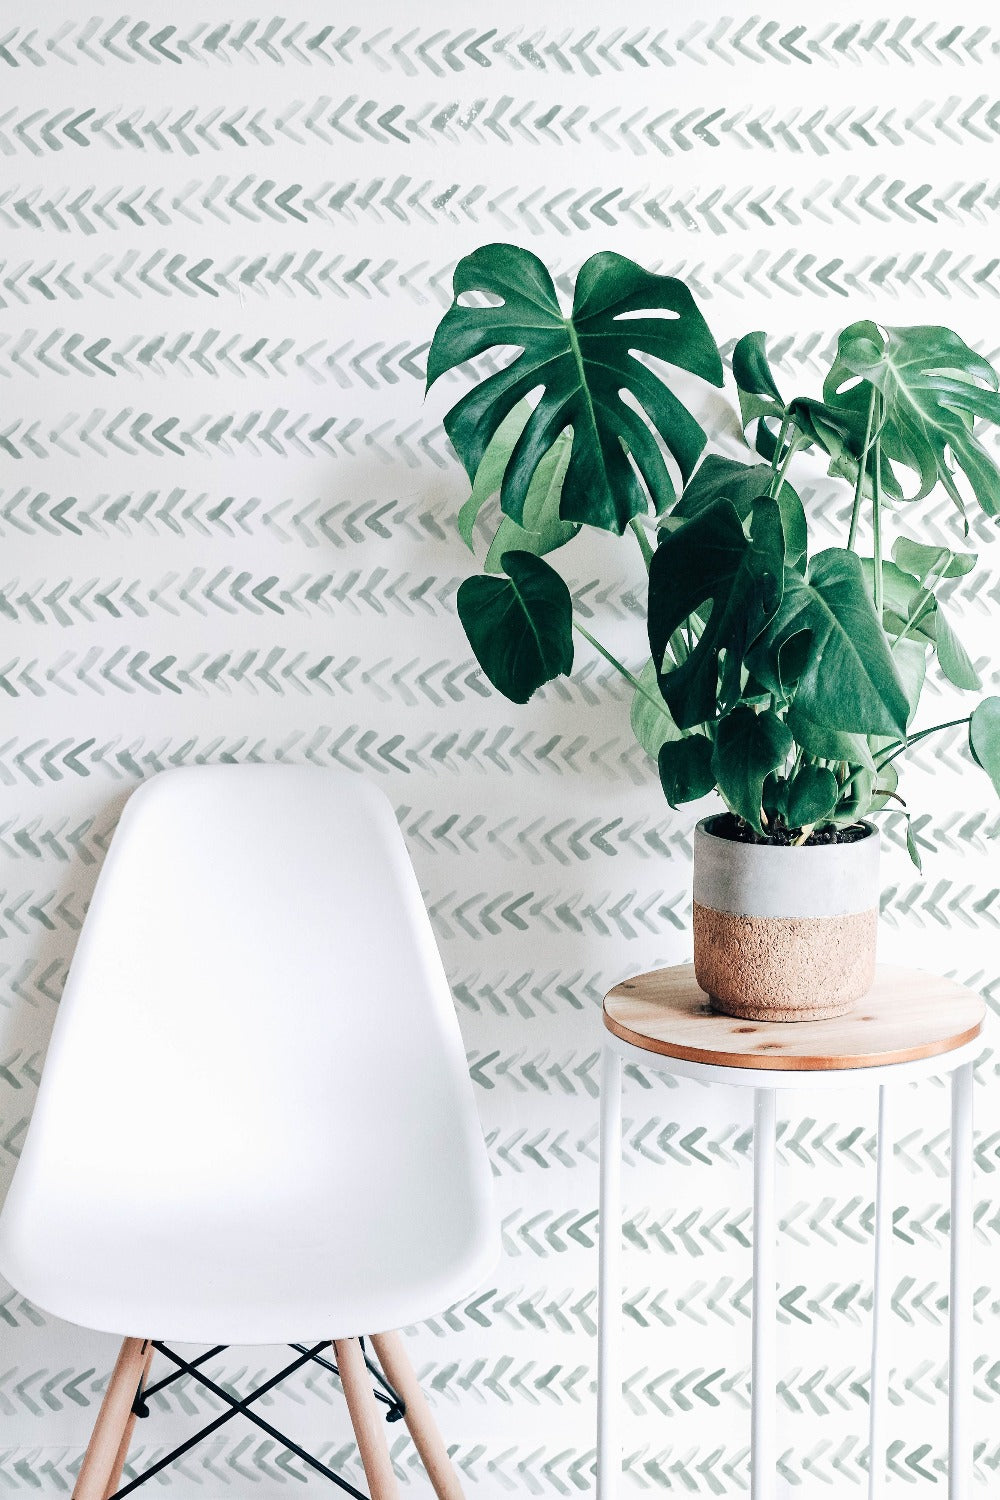 A minimalist interior scene showcasing the "Hand Painted Wallpaper" with a gentle sage green herringbone pattern. A modern white chair sits in the foreground, beside a small wooden table holding a potted monstera plant, which adds a vibrant touch of greenery against the hand-painted strokes of the wallpaper.